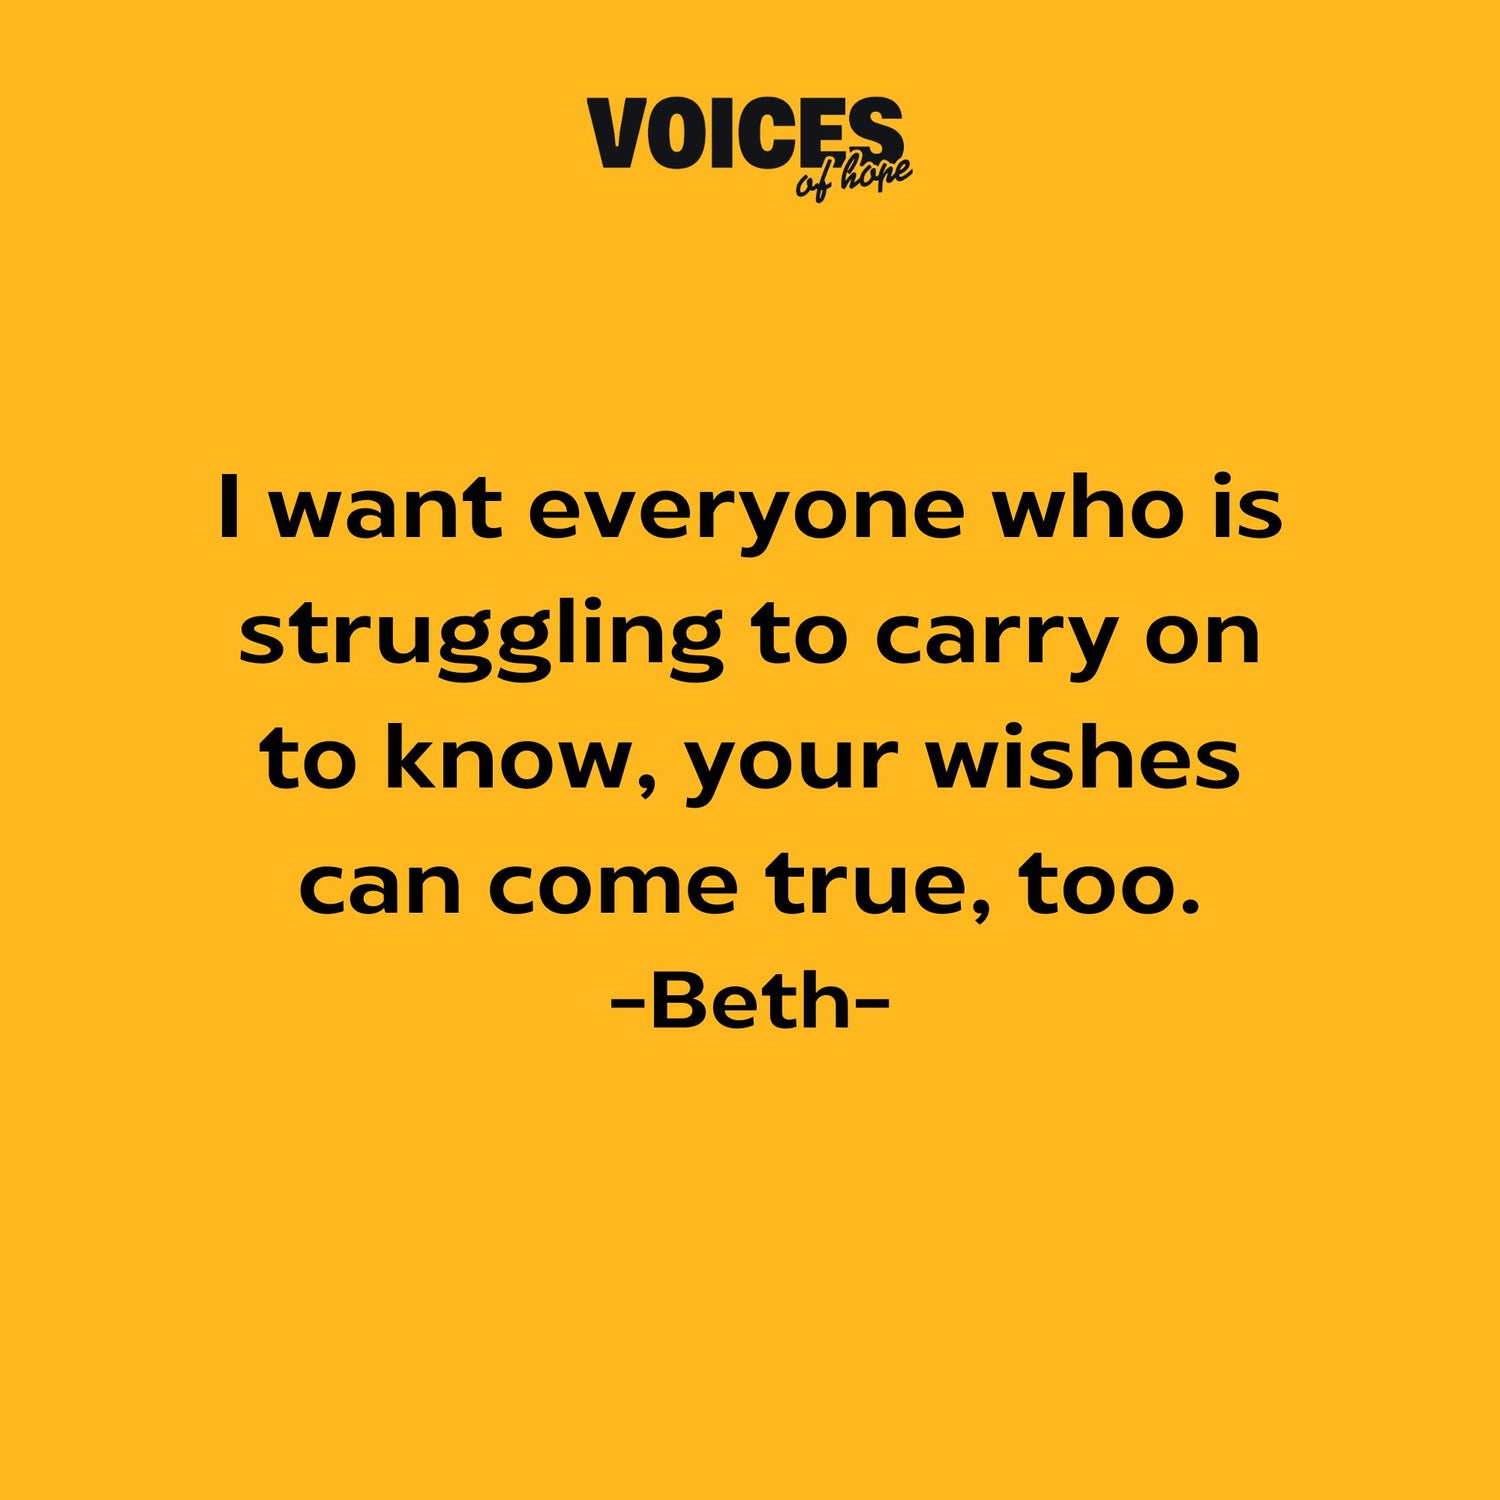 Yellow background with black writing that reads: "I want everyone who is struggling to carry on to know, your wishes can come true, too. Beth."